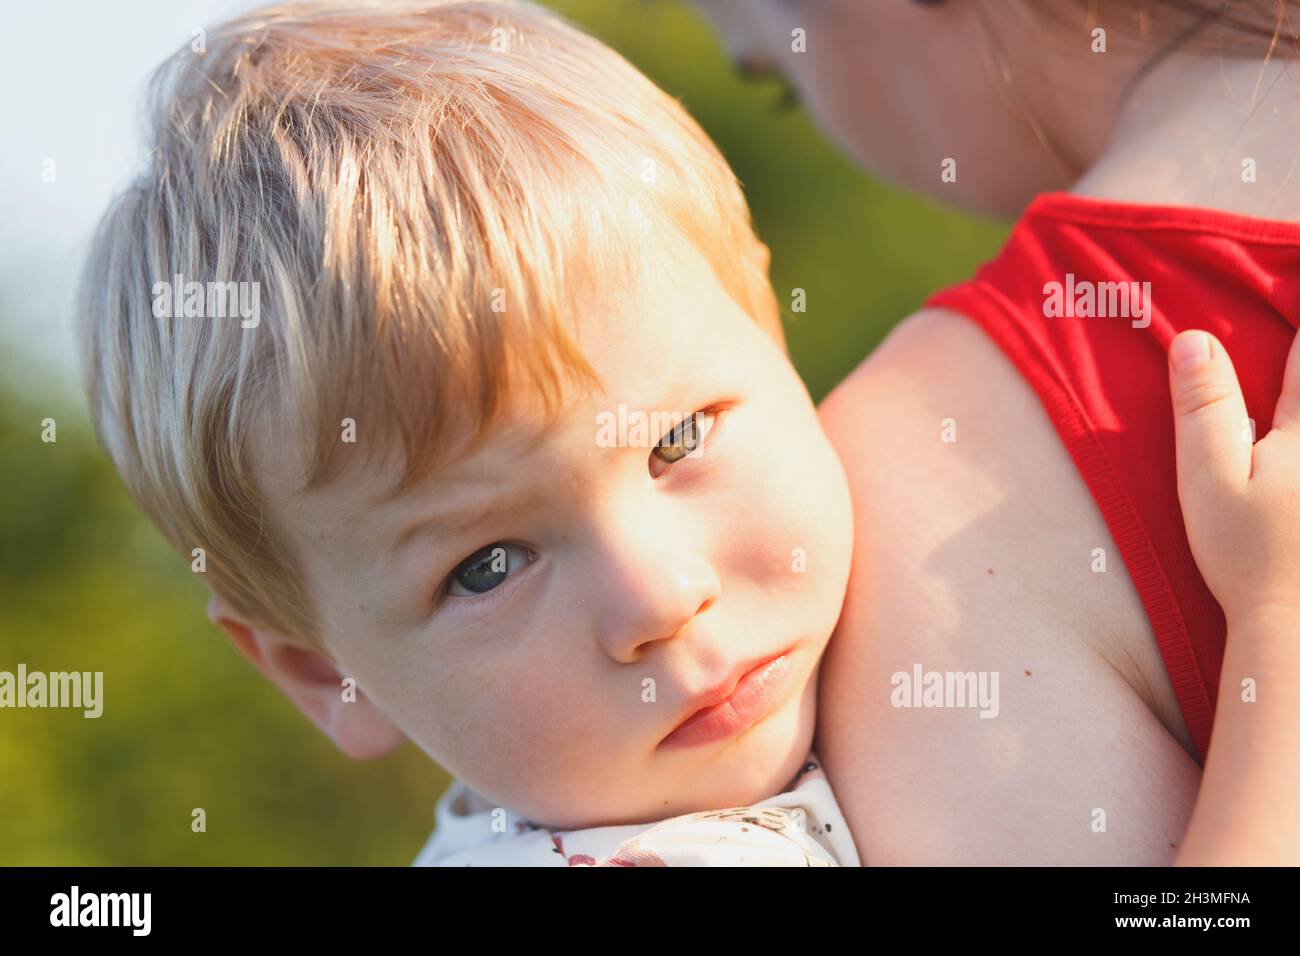 Portrait of a boy 2 years old in the arms of his mother Stock Photo